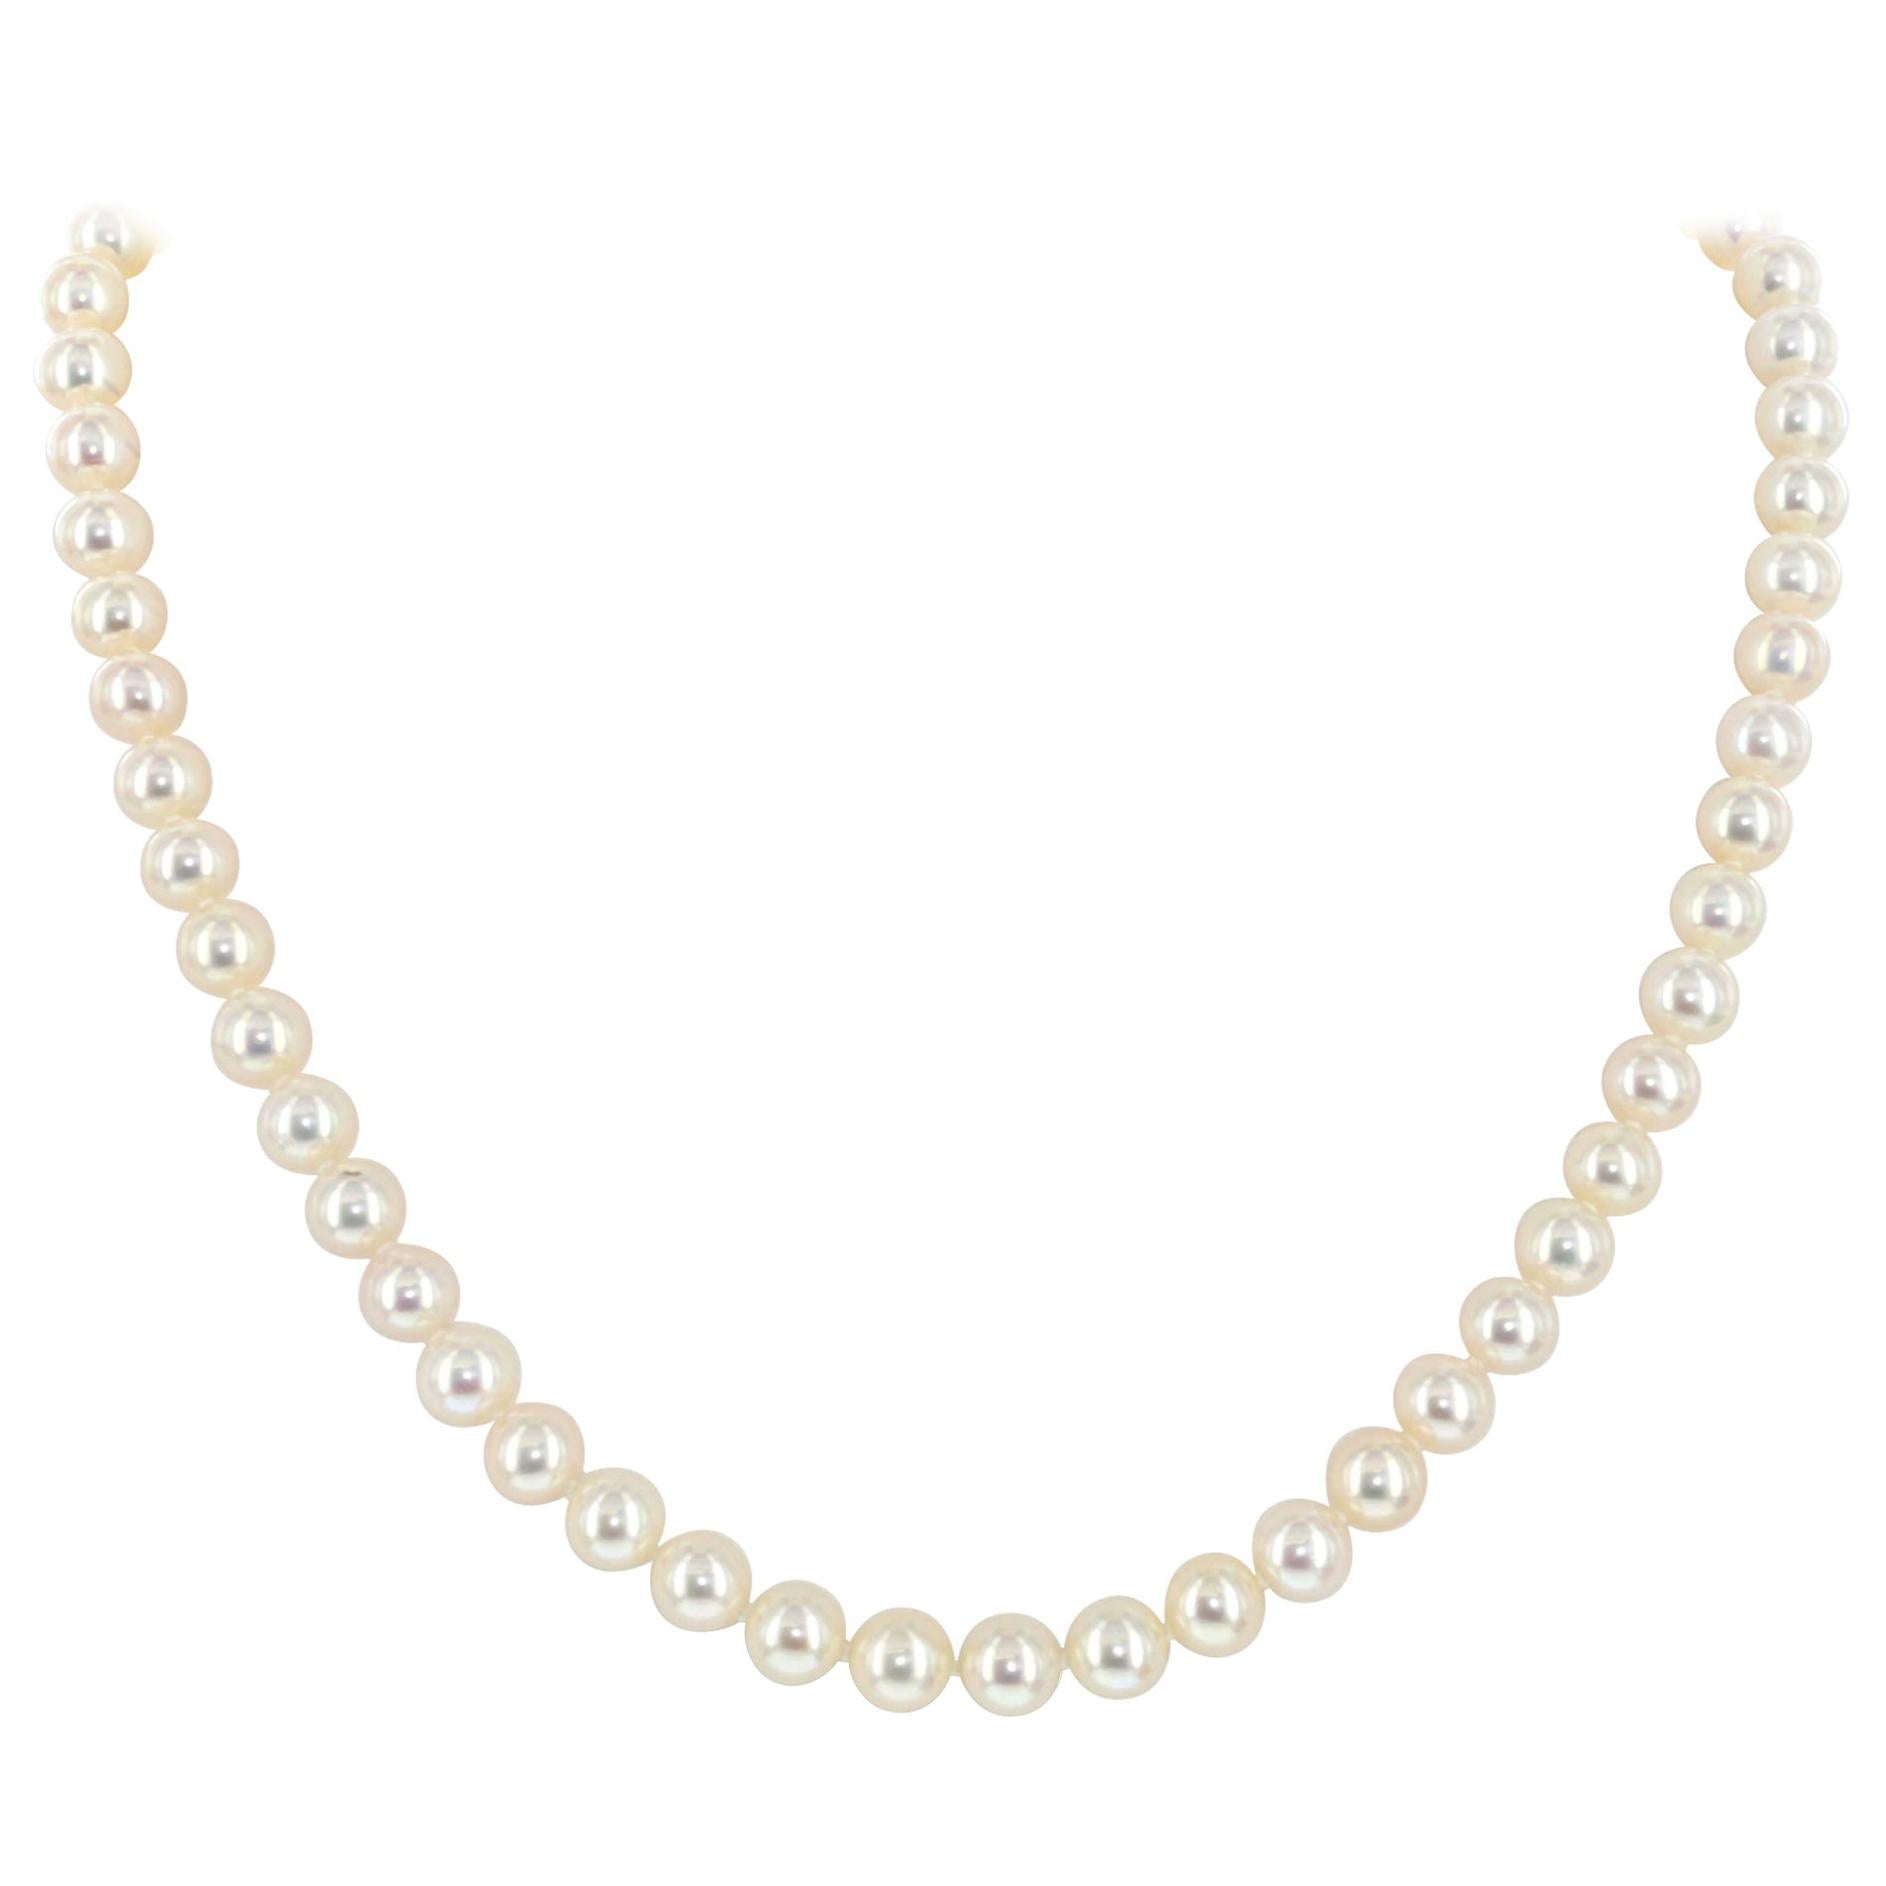 Japanese Akoya Cultured 9-9.5mm Pearl Necklace with 14 Karat Yellow Clasp For Sale